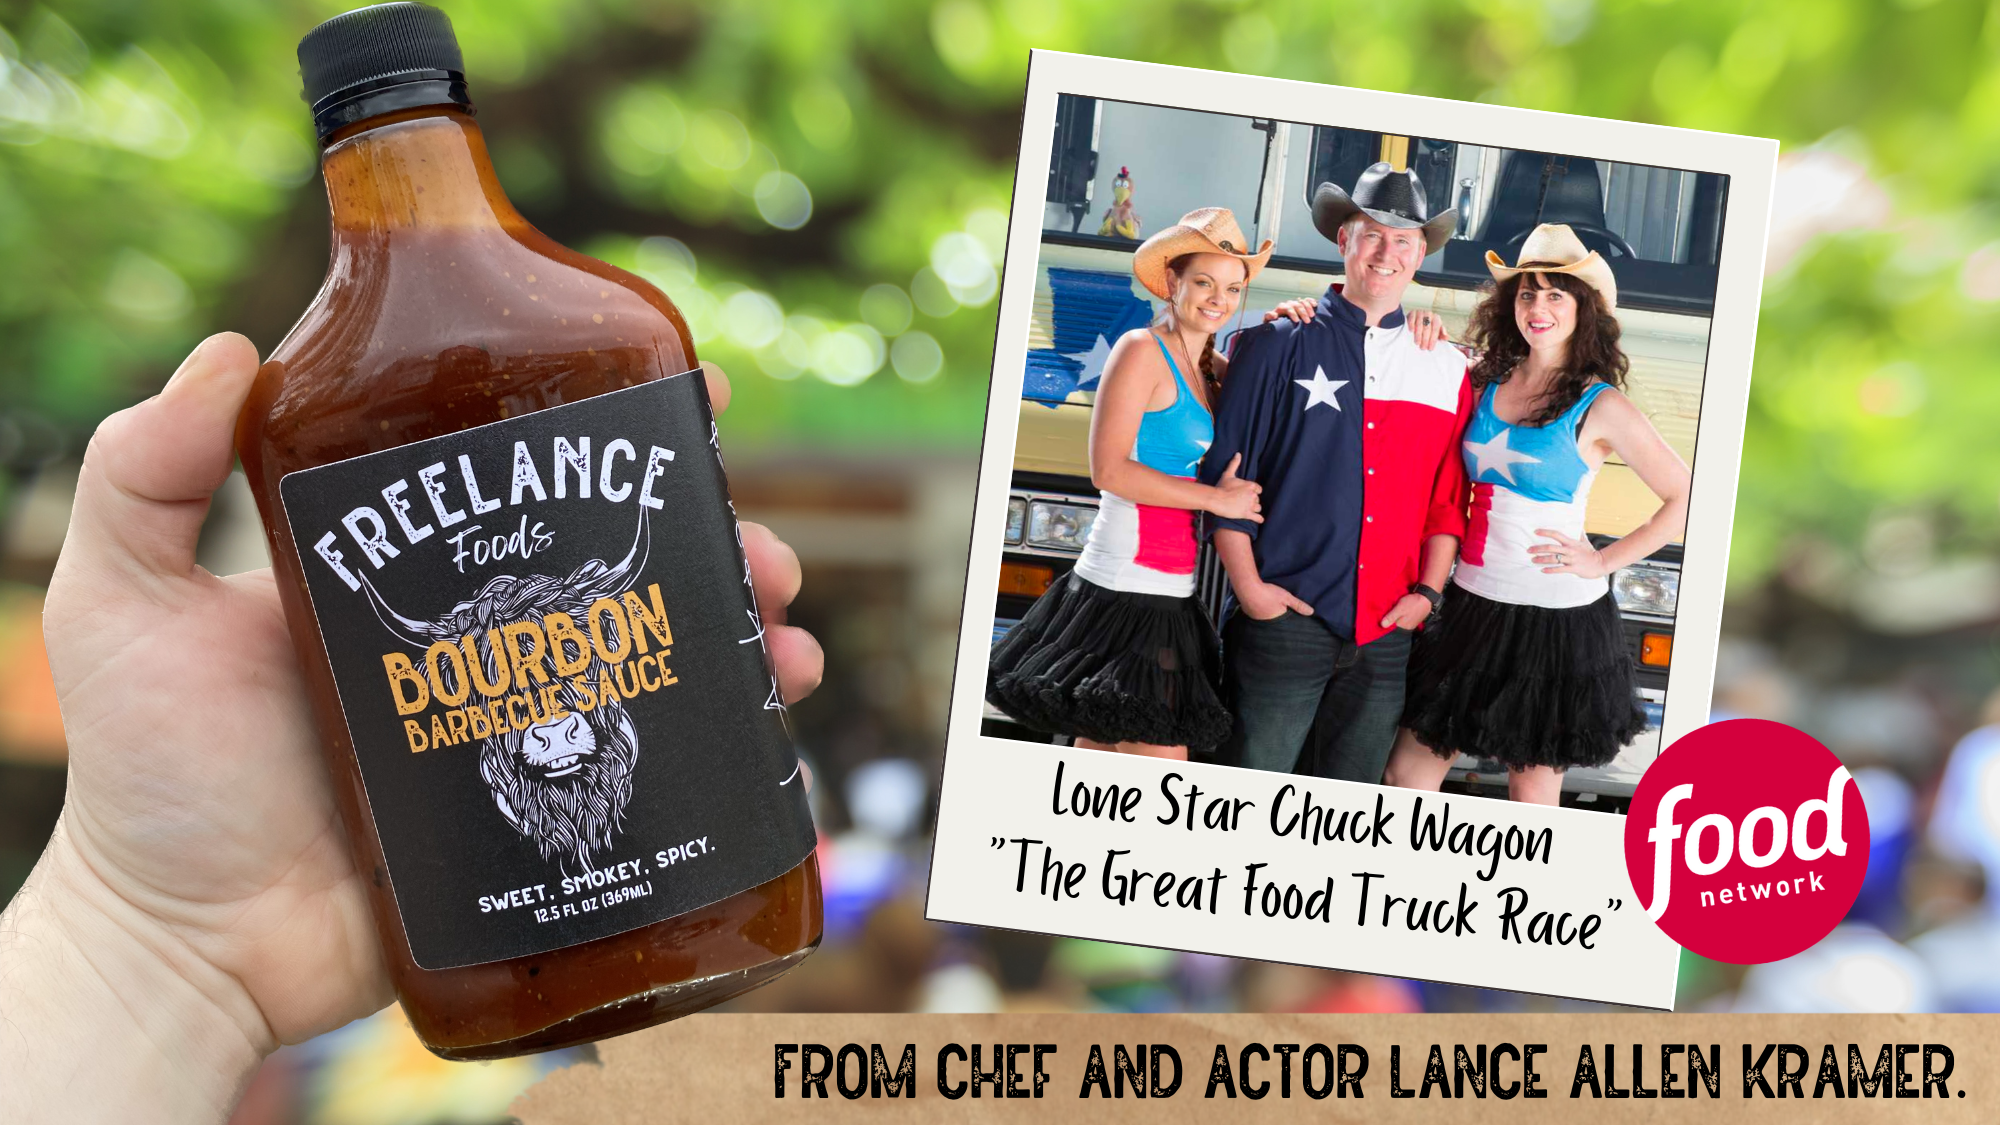 From Chef and Actor Lance Allen Kramer